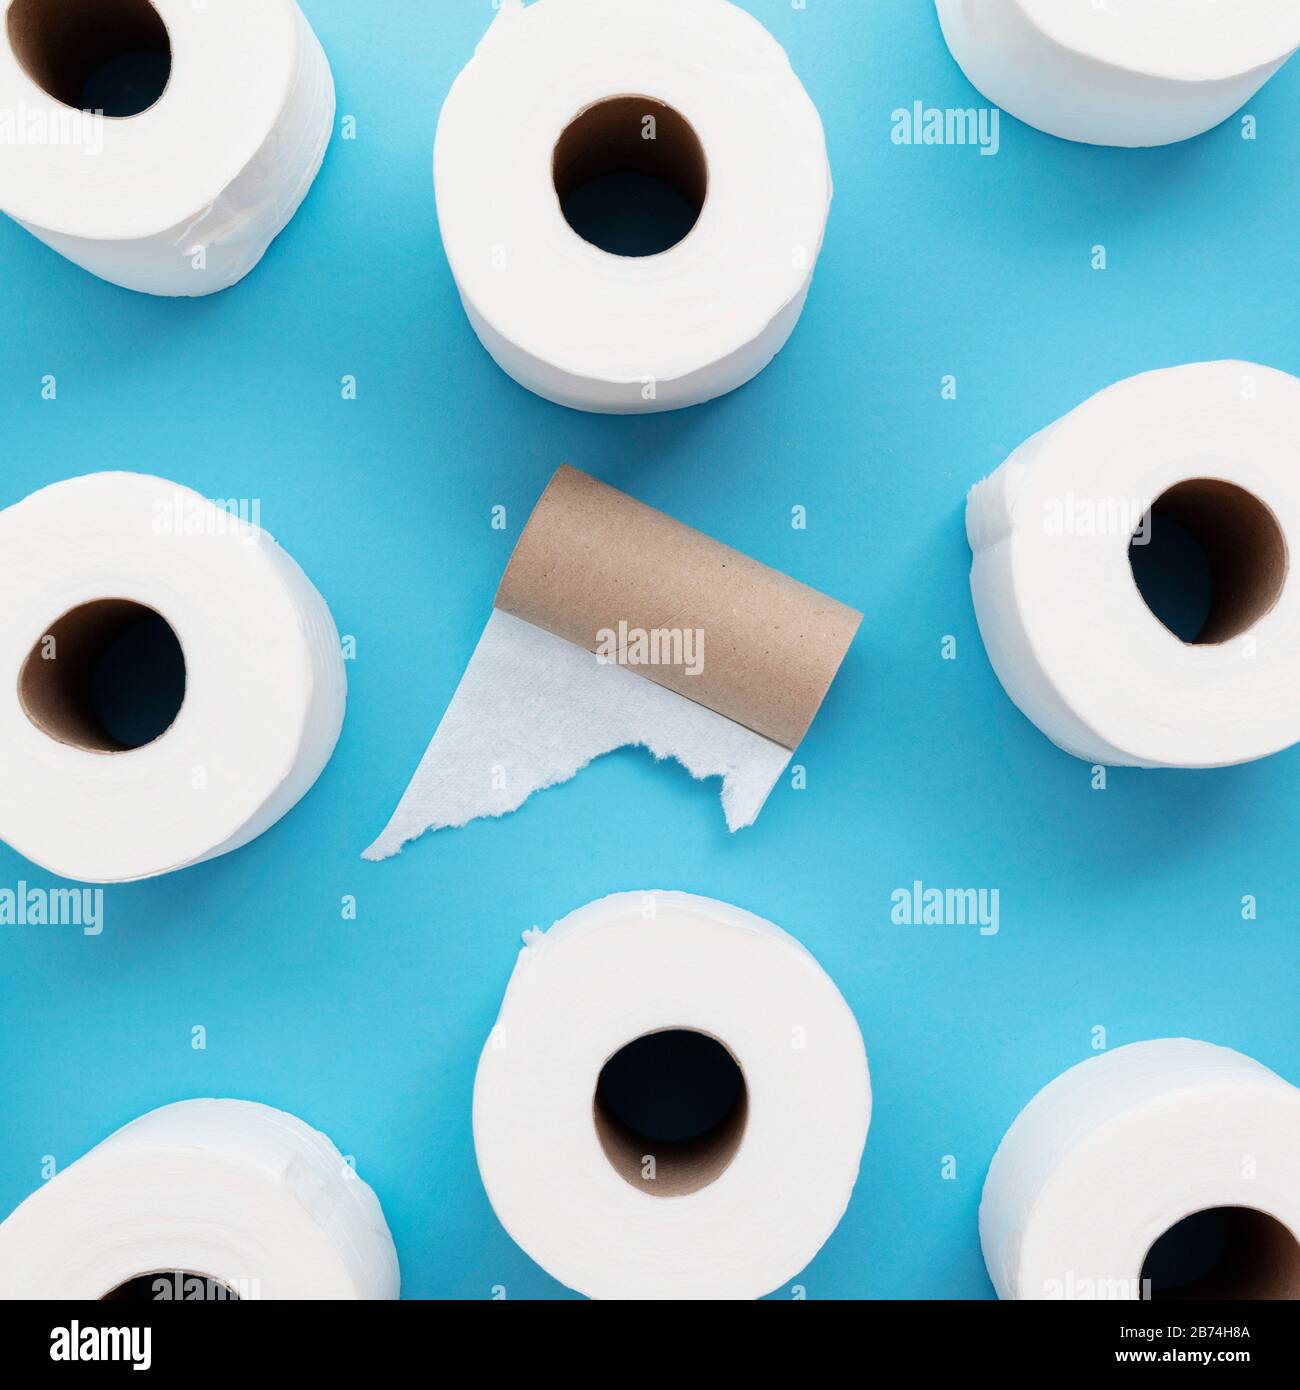 Empty used toilet roll next to a full roll of toilet paper Stock Photo